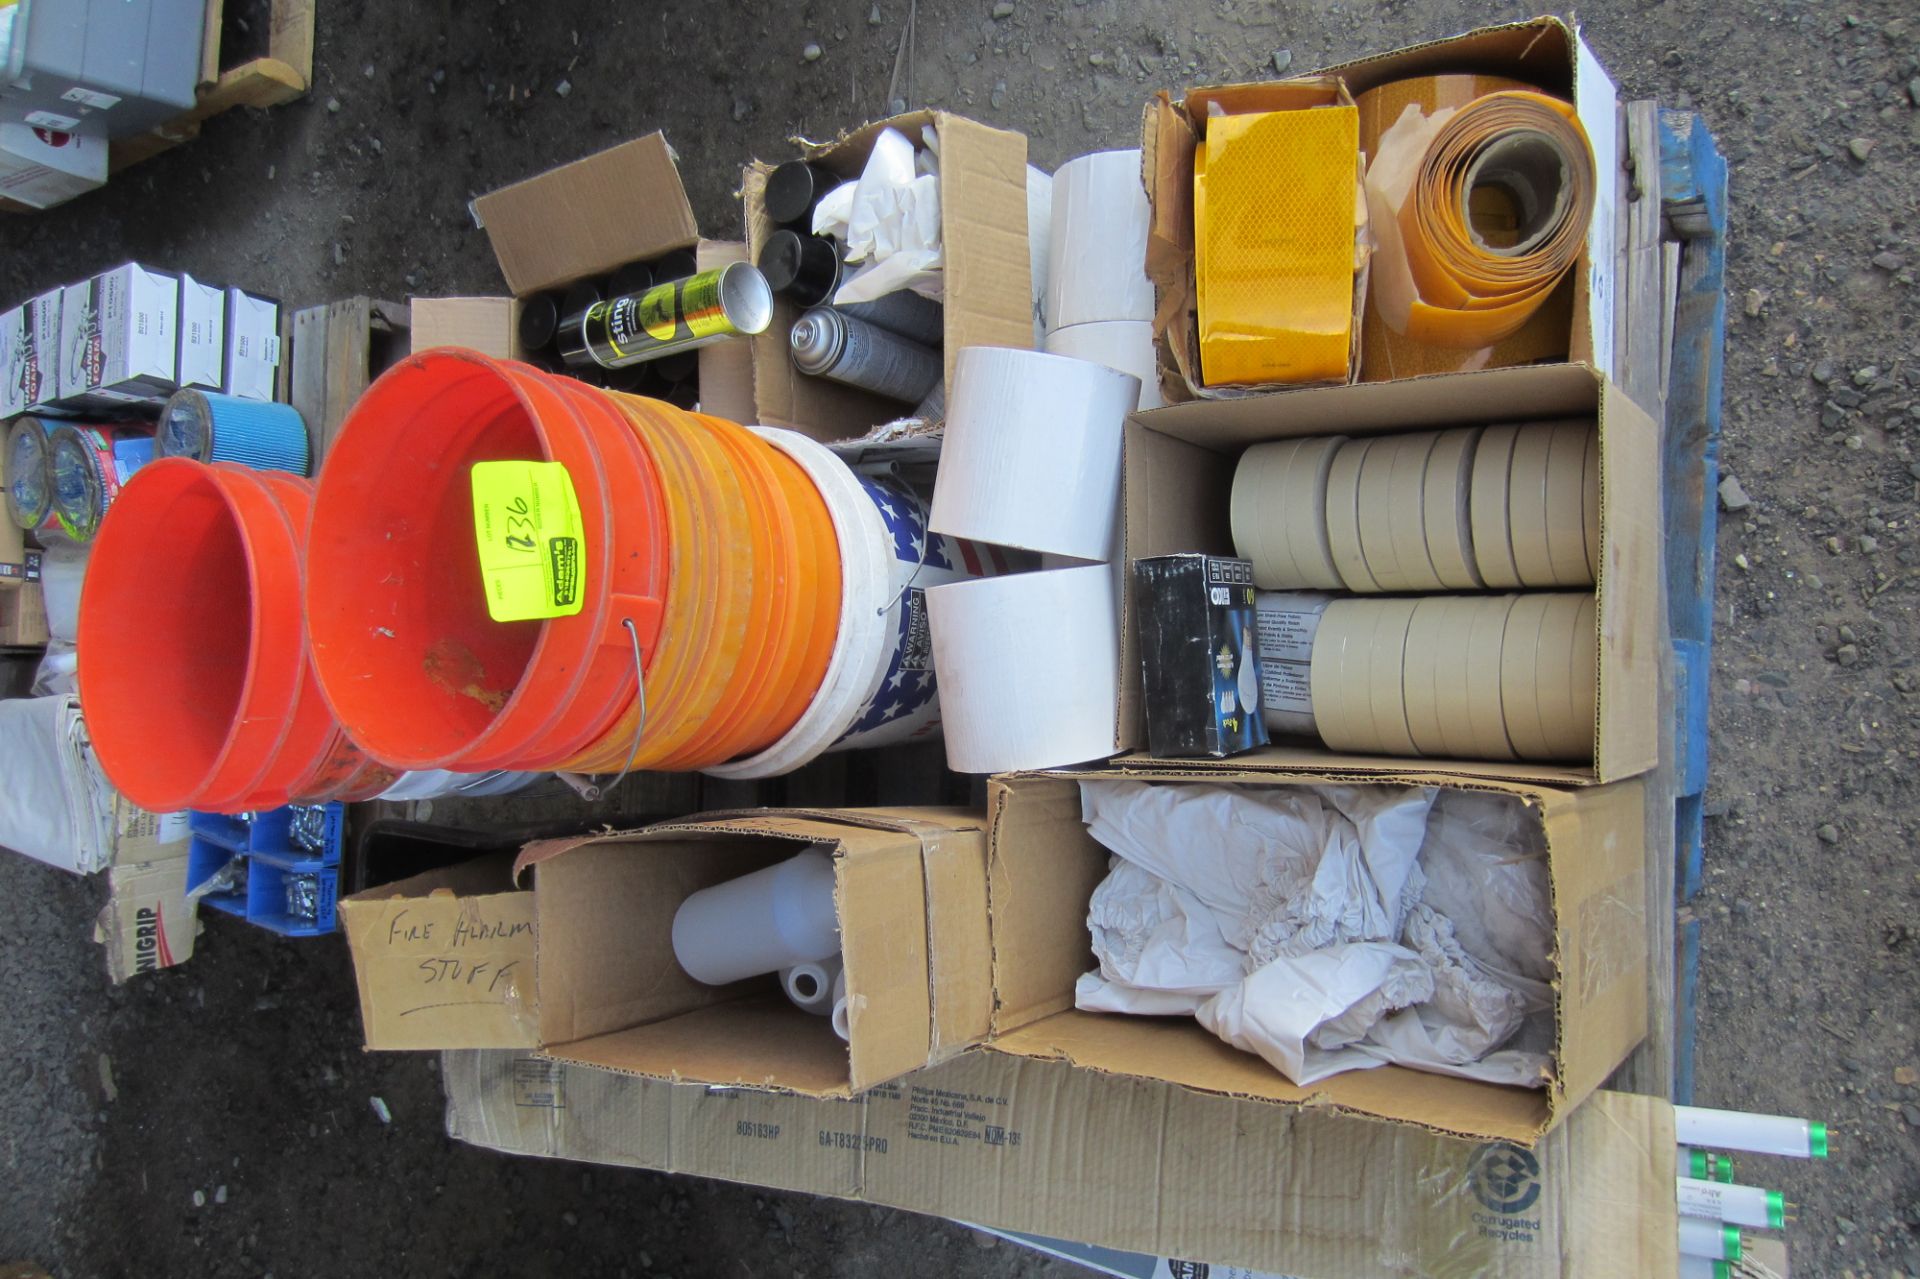 REFLECTIVE TAPE, INSECTICIDE, BUCKETS, LIGHT BULBS